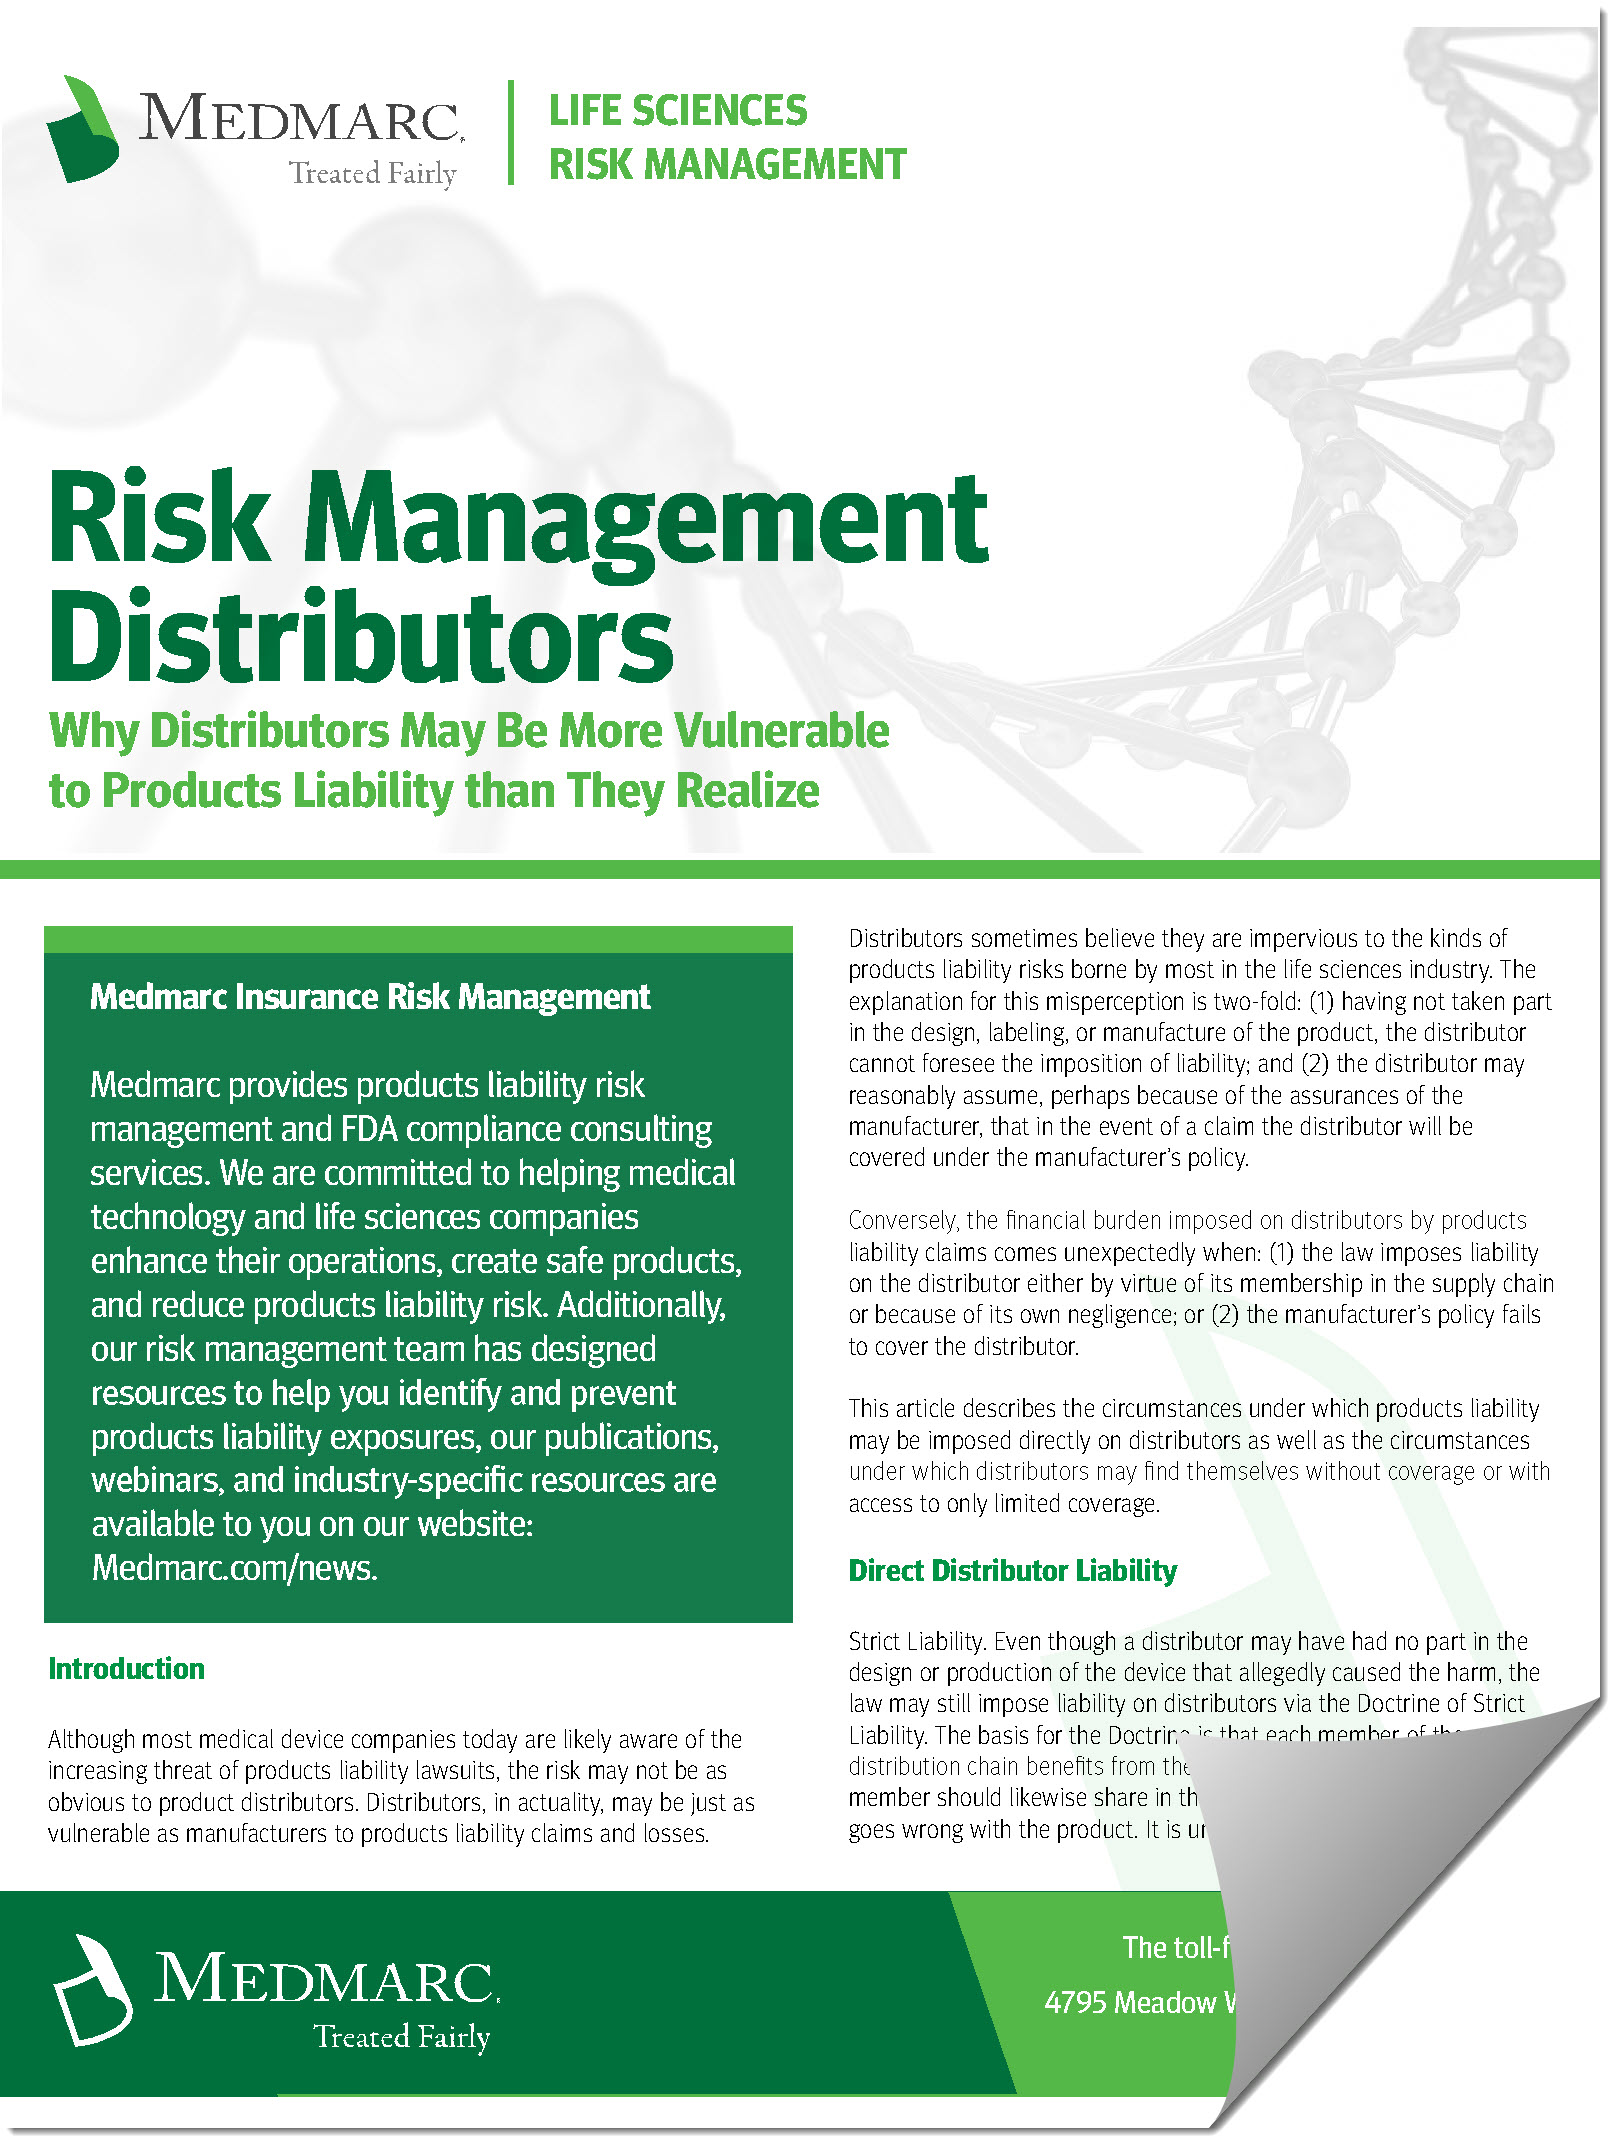 Why Distributors May Be More Vulnerable to Products Liability than They Realize